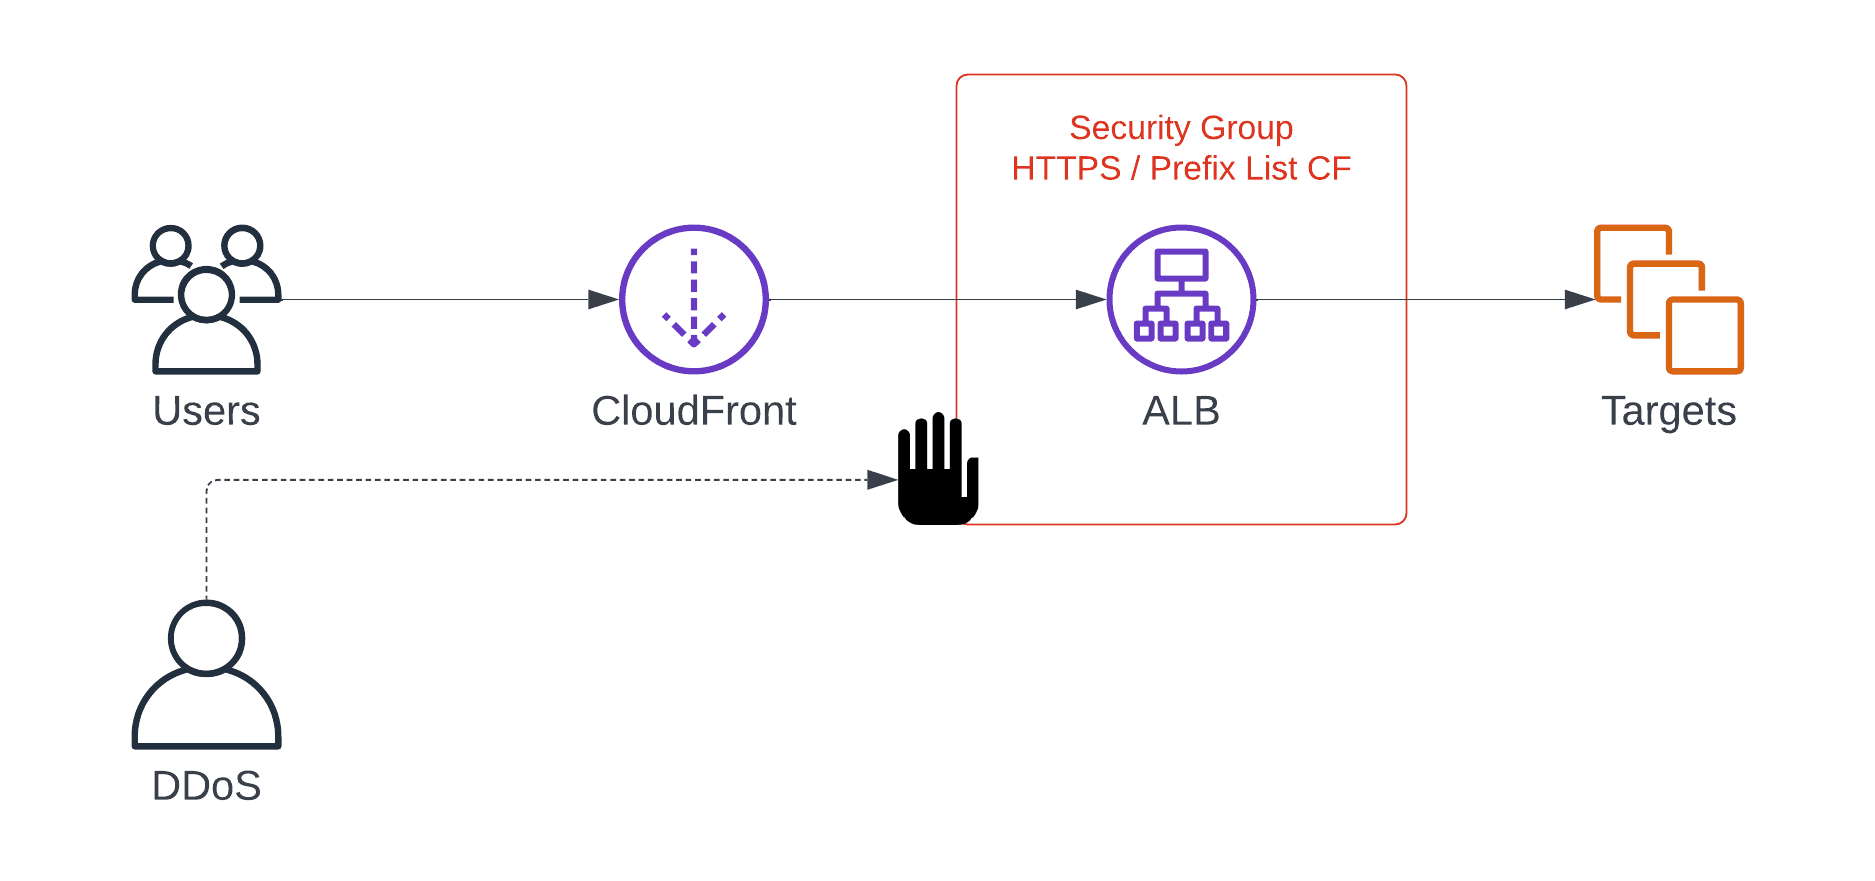 ALB accessible from CloudFront only